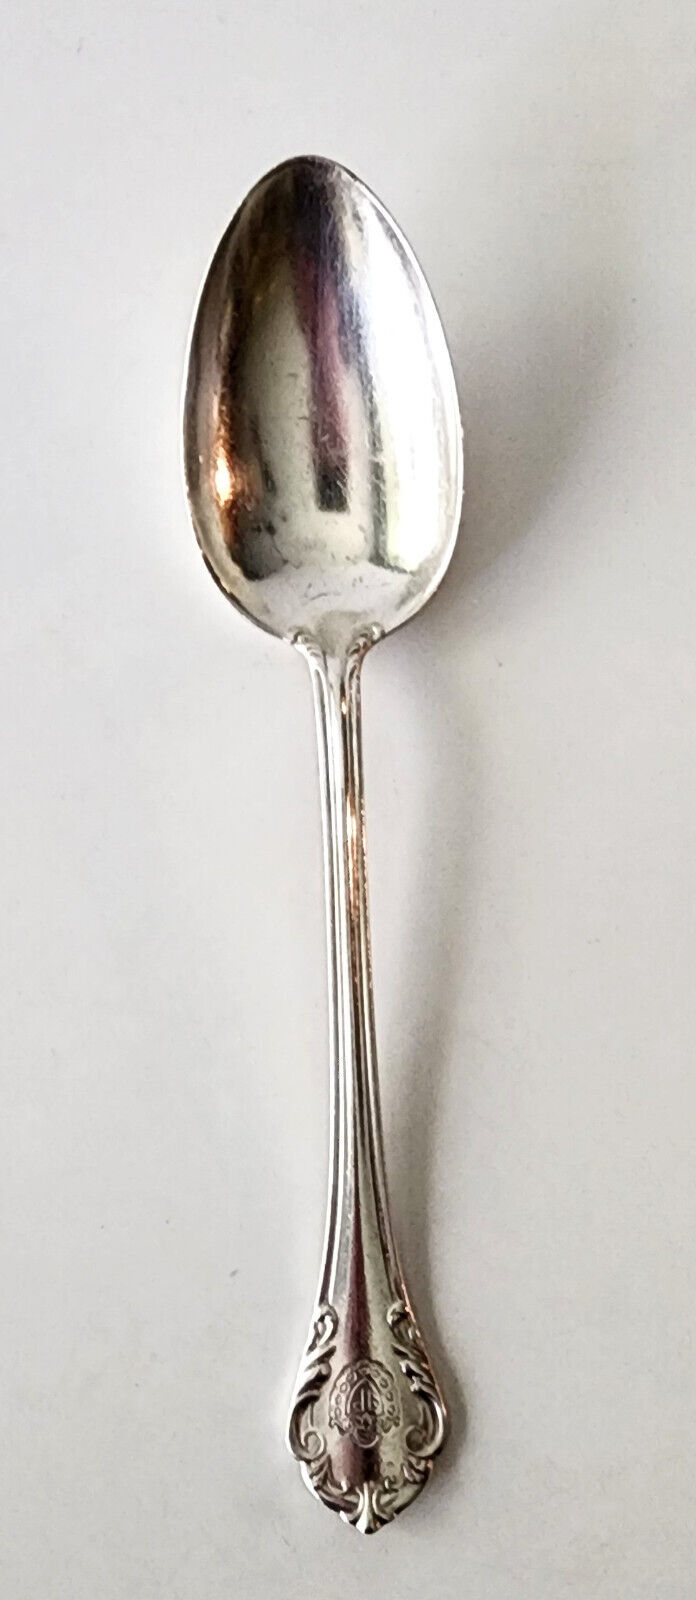 Vintage The Plaza Hotel N.Y. Silverplate Serving Spoon Reed & Barton 2 Available